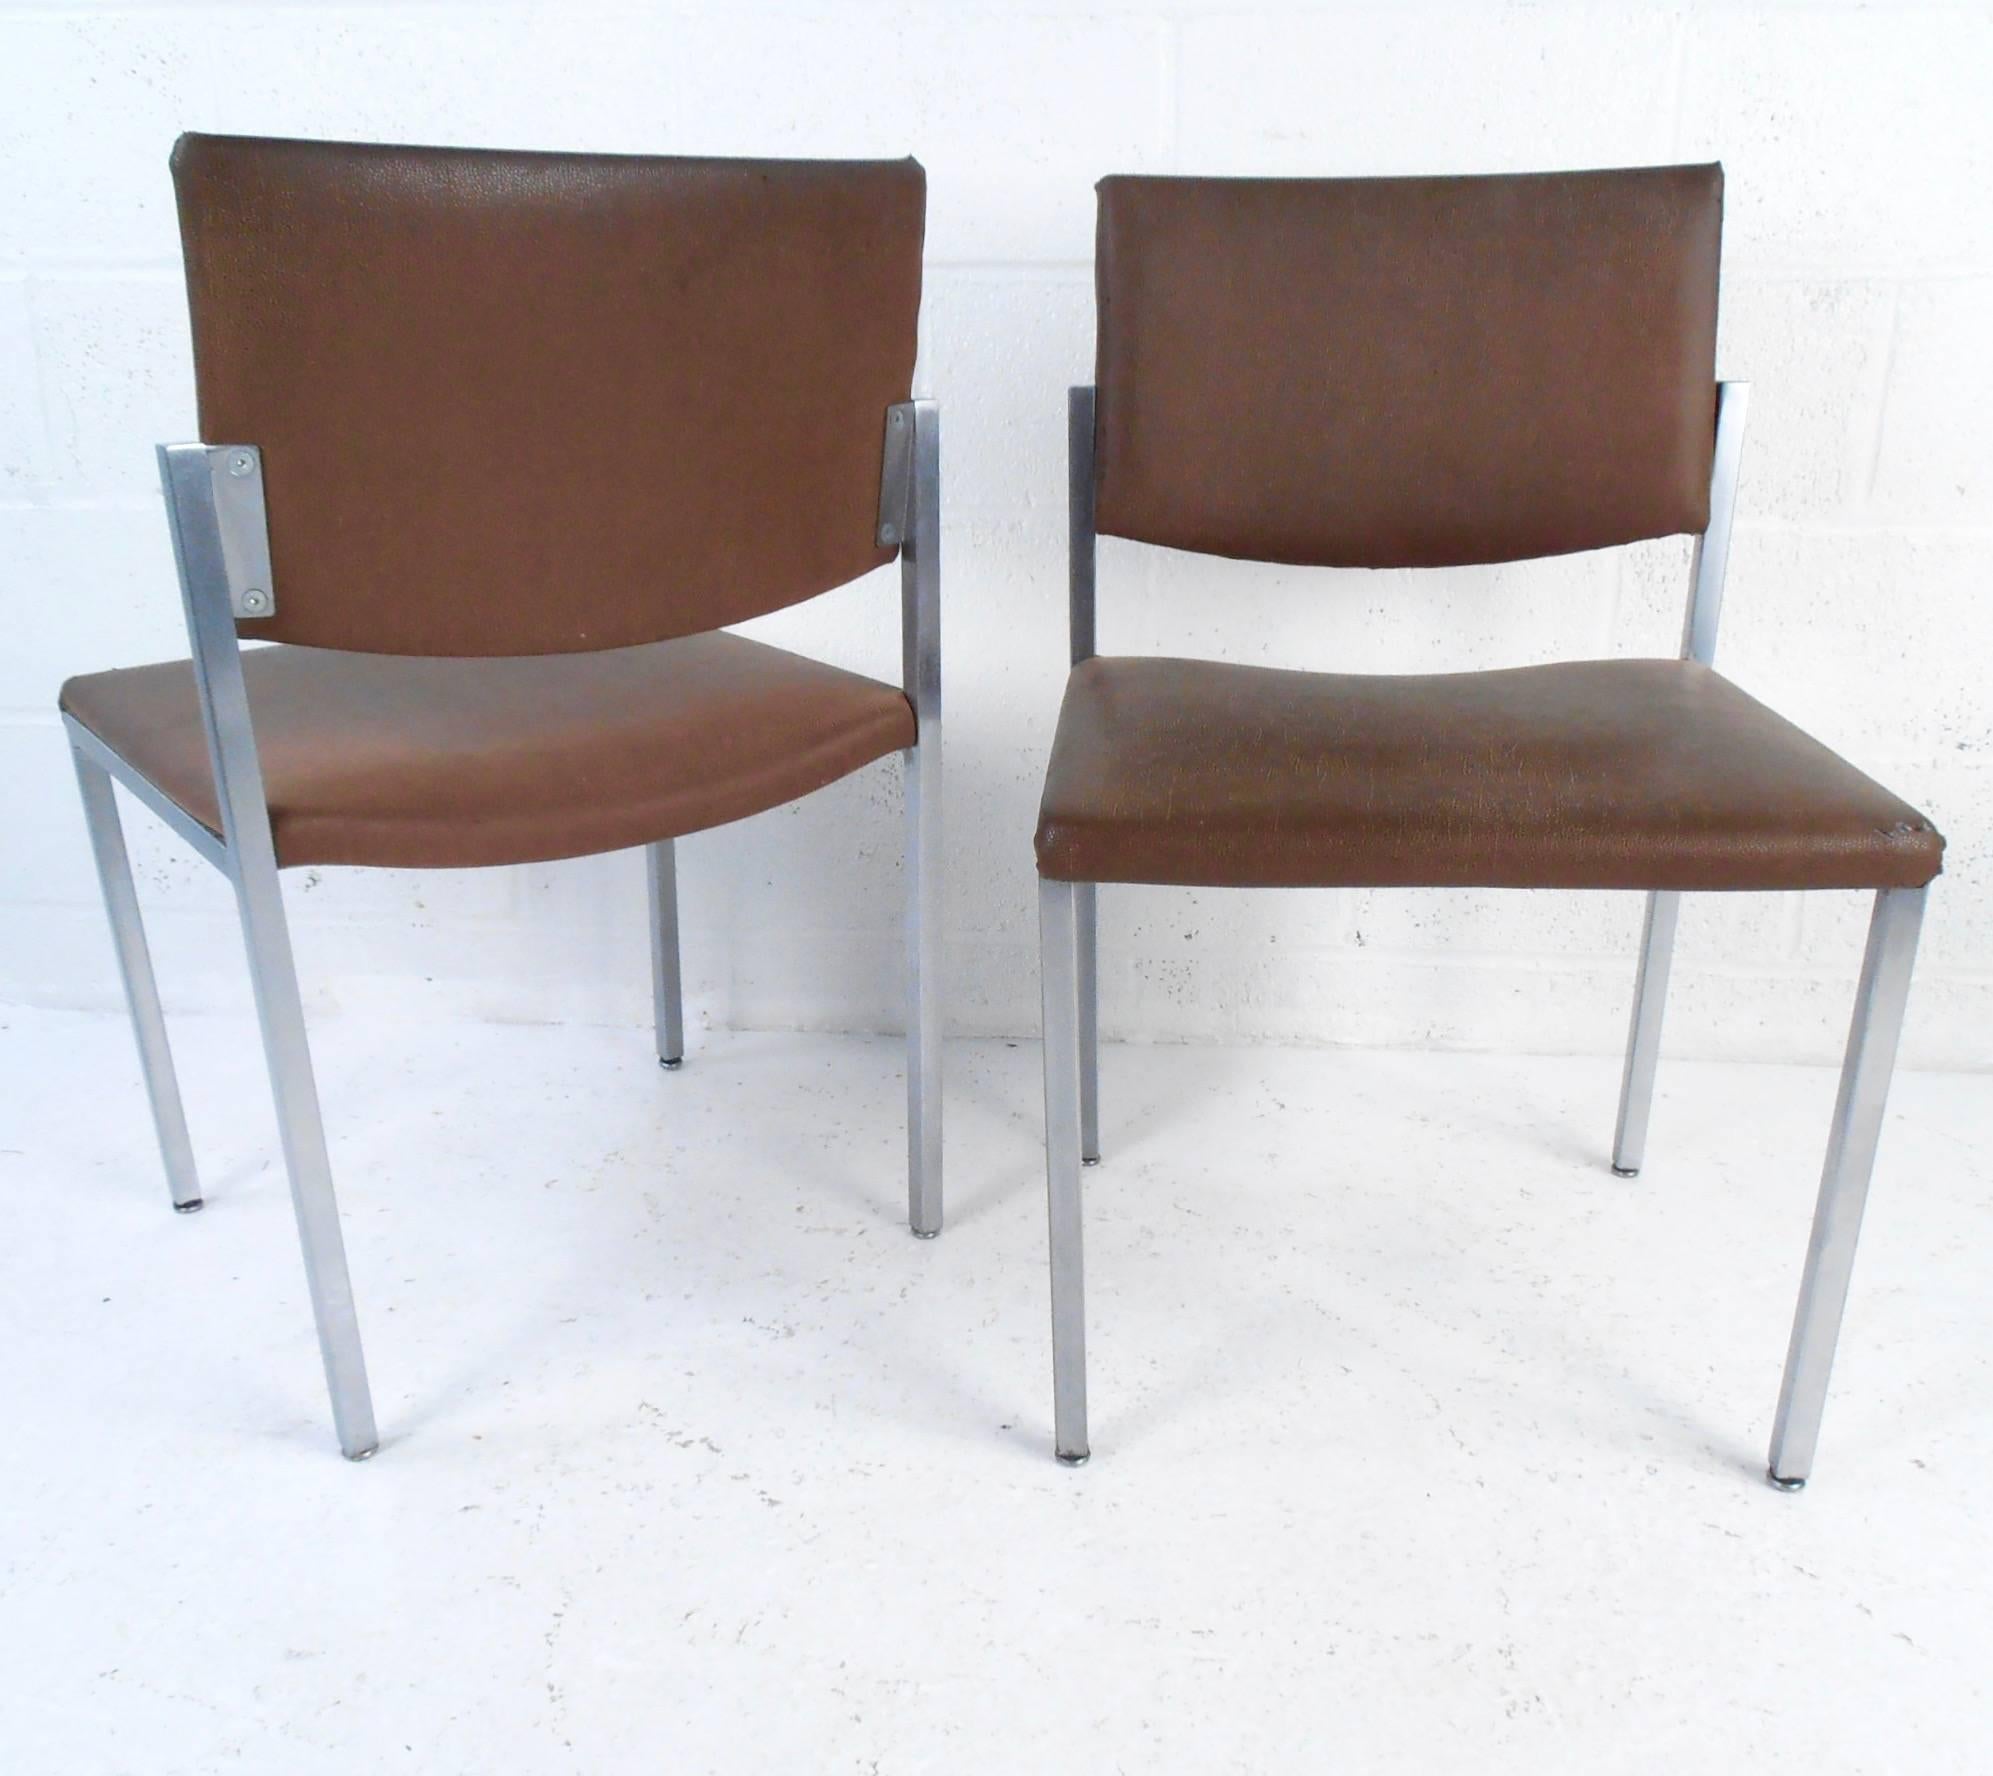 This set of six vintage dining or conference chairs feature upholstered faux-leather upholstery and polished aluminum frames. Comfortable proportions and padding combined with the classic Mid-Century style of the set make these the perfect addition